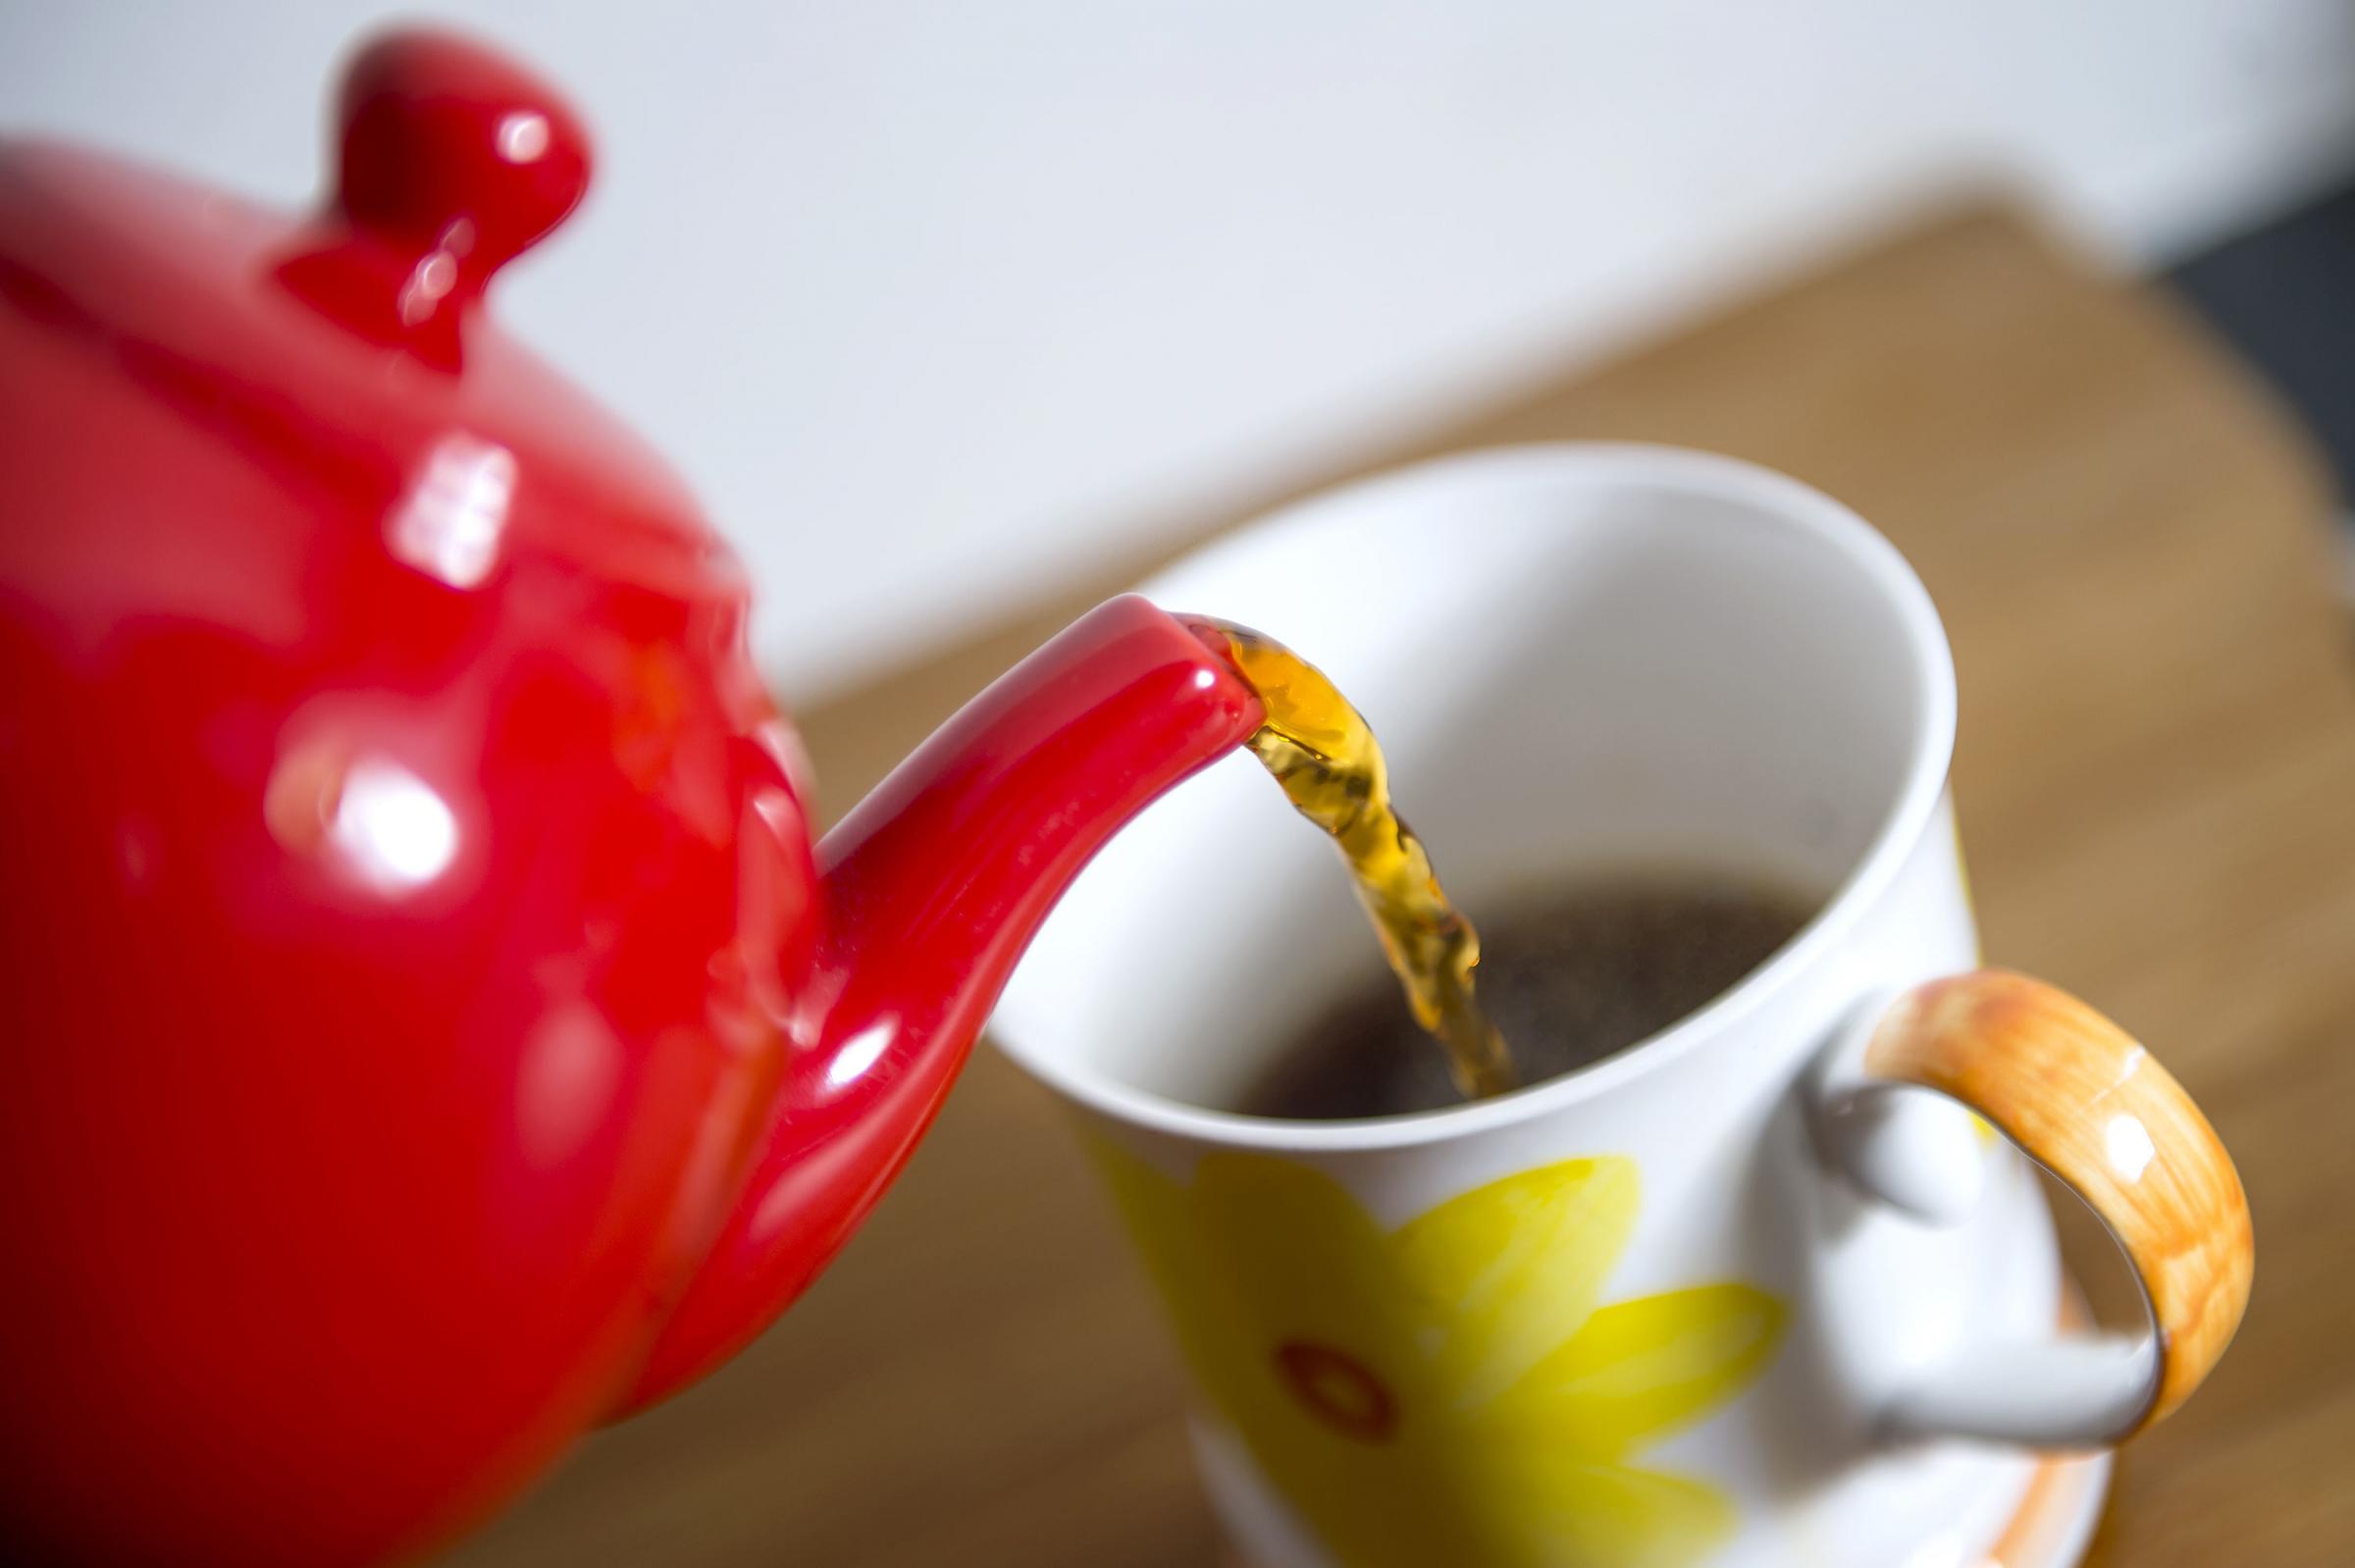 Trouble brewing for British cuppa as climate change threatens tea production - Bracknell News